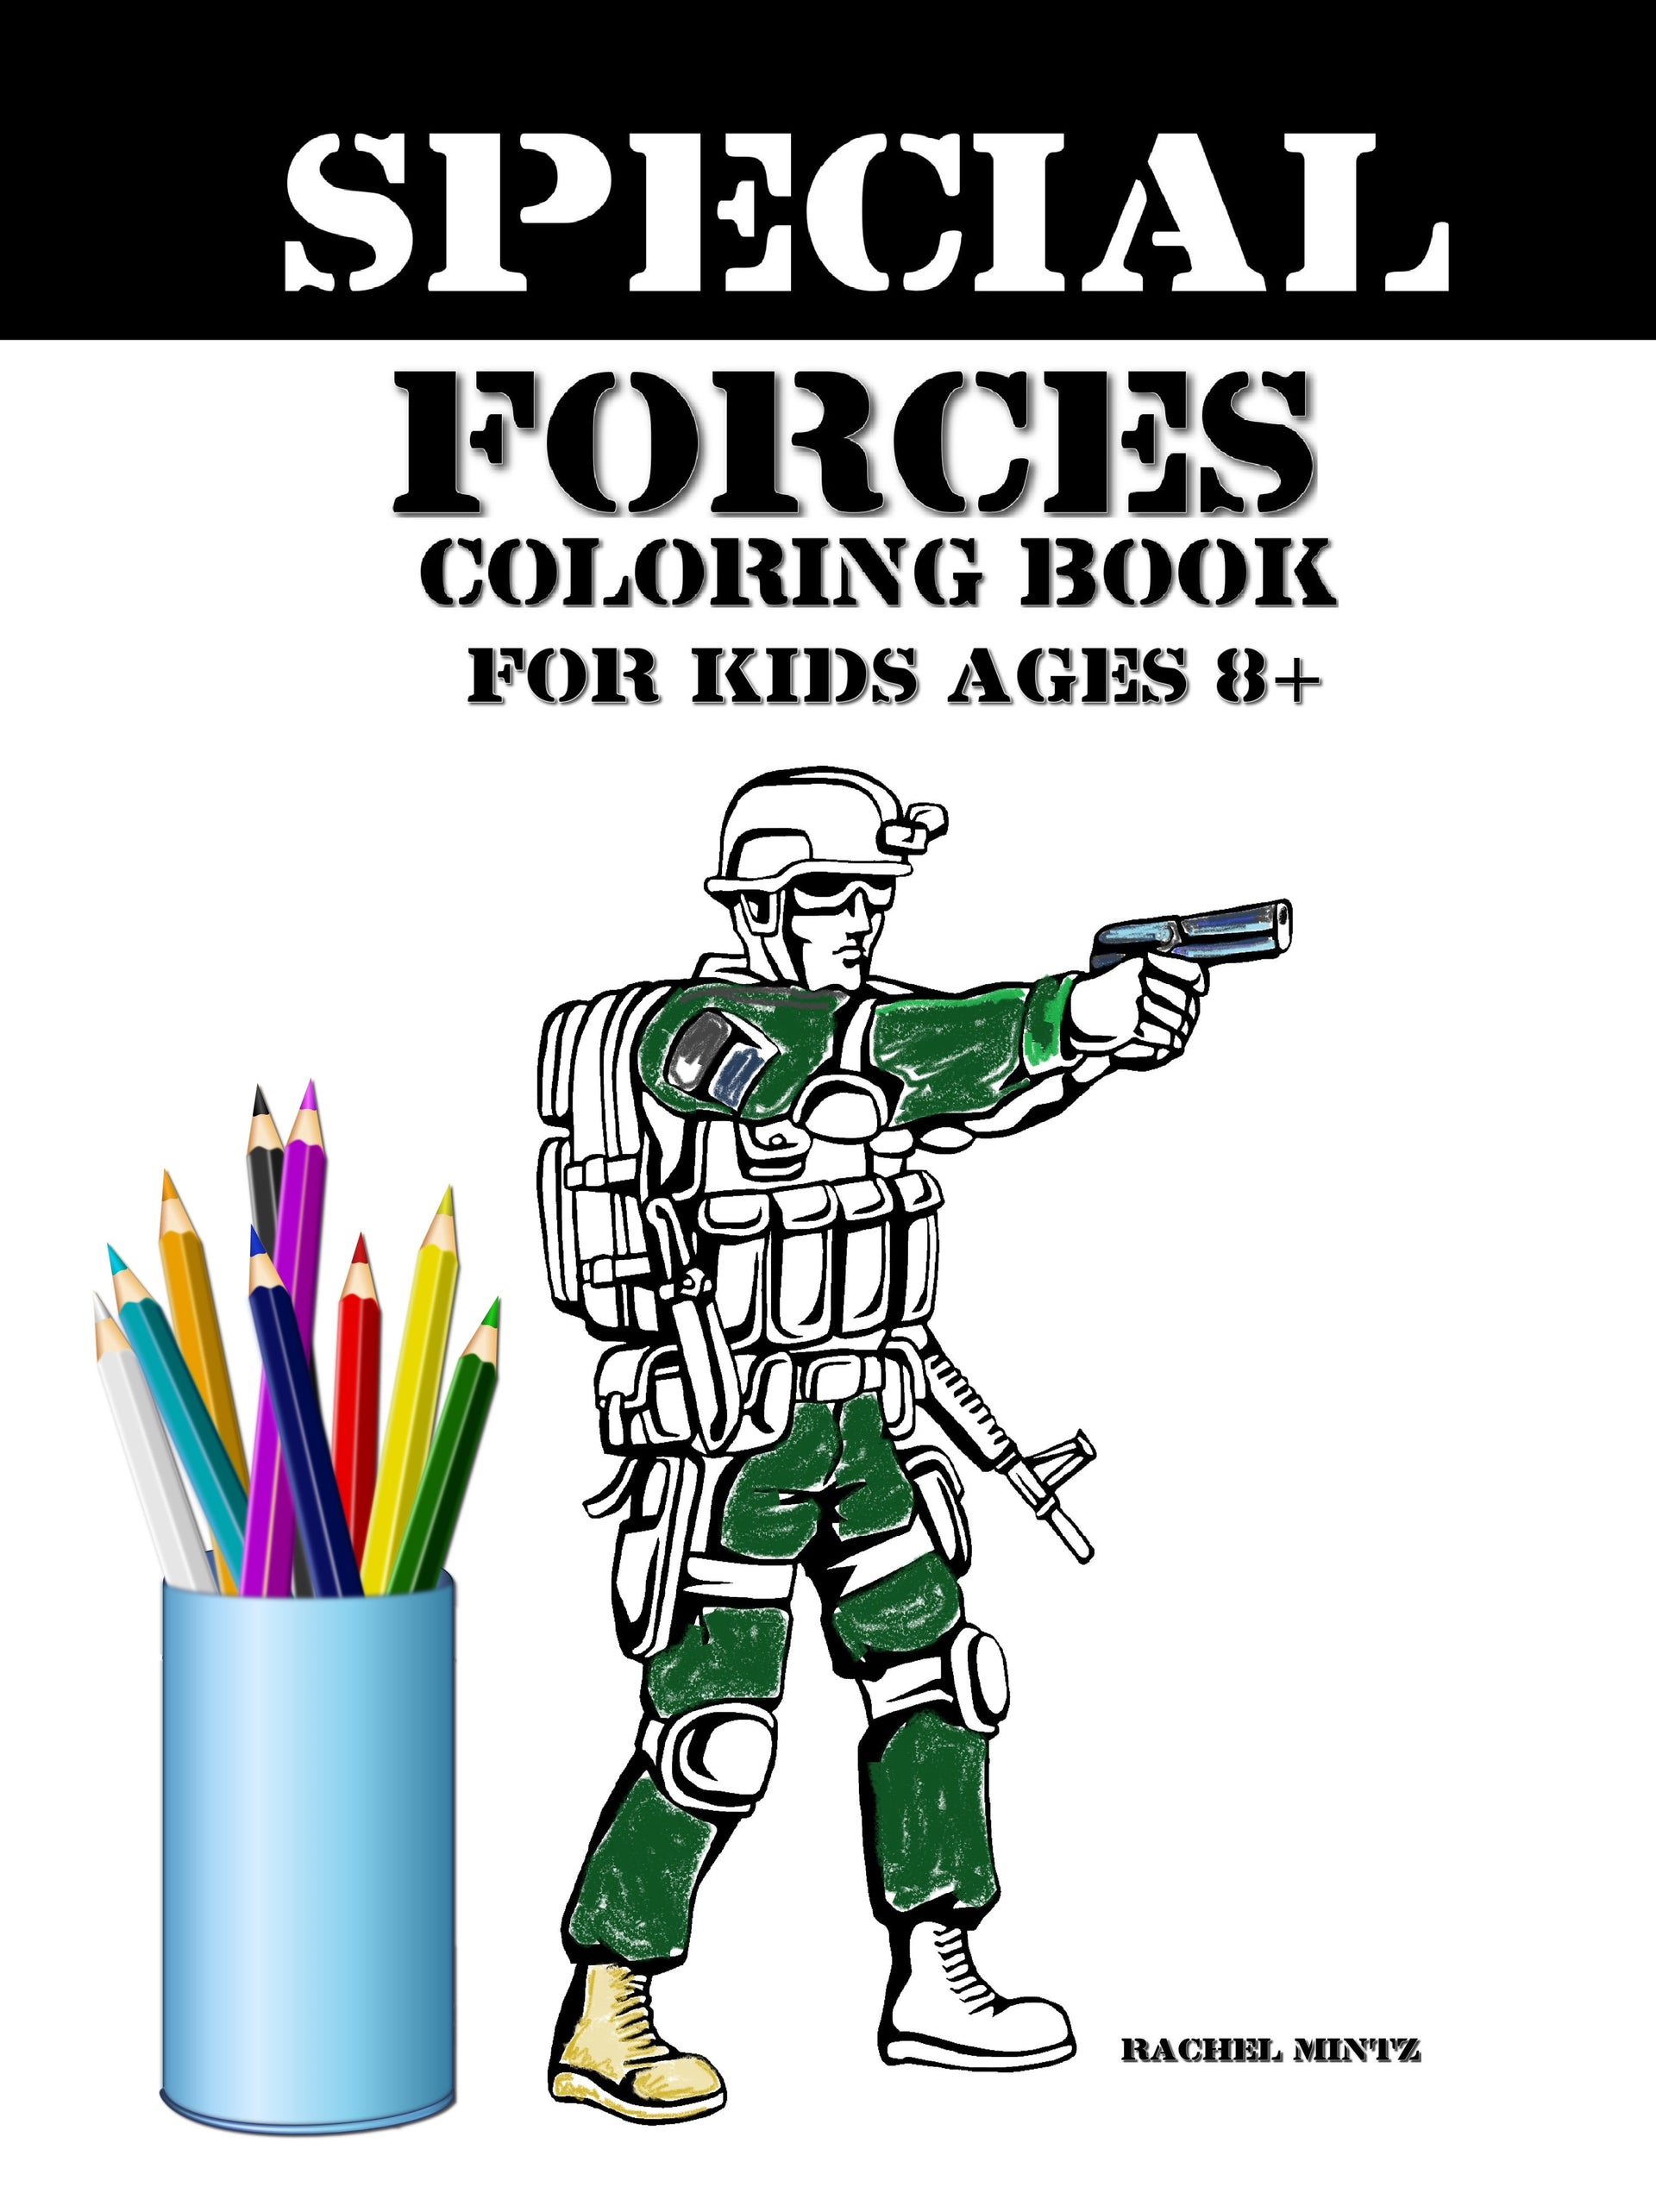 coloring books for kids ages 8-12: picture books for children ages 4-6  (Paperback)